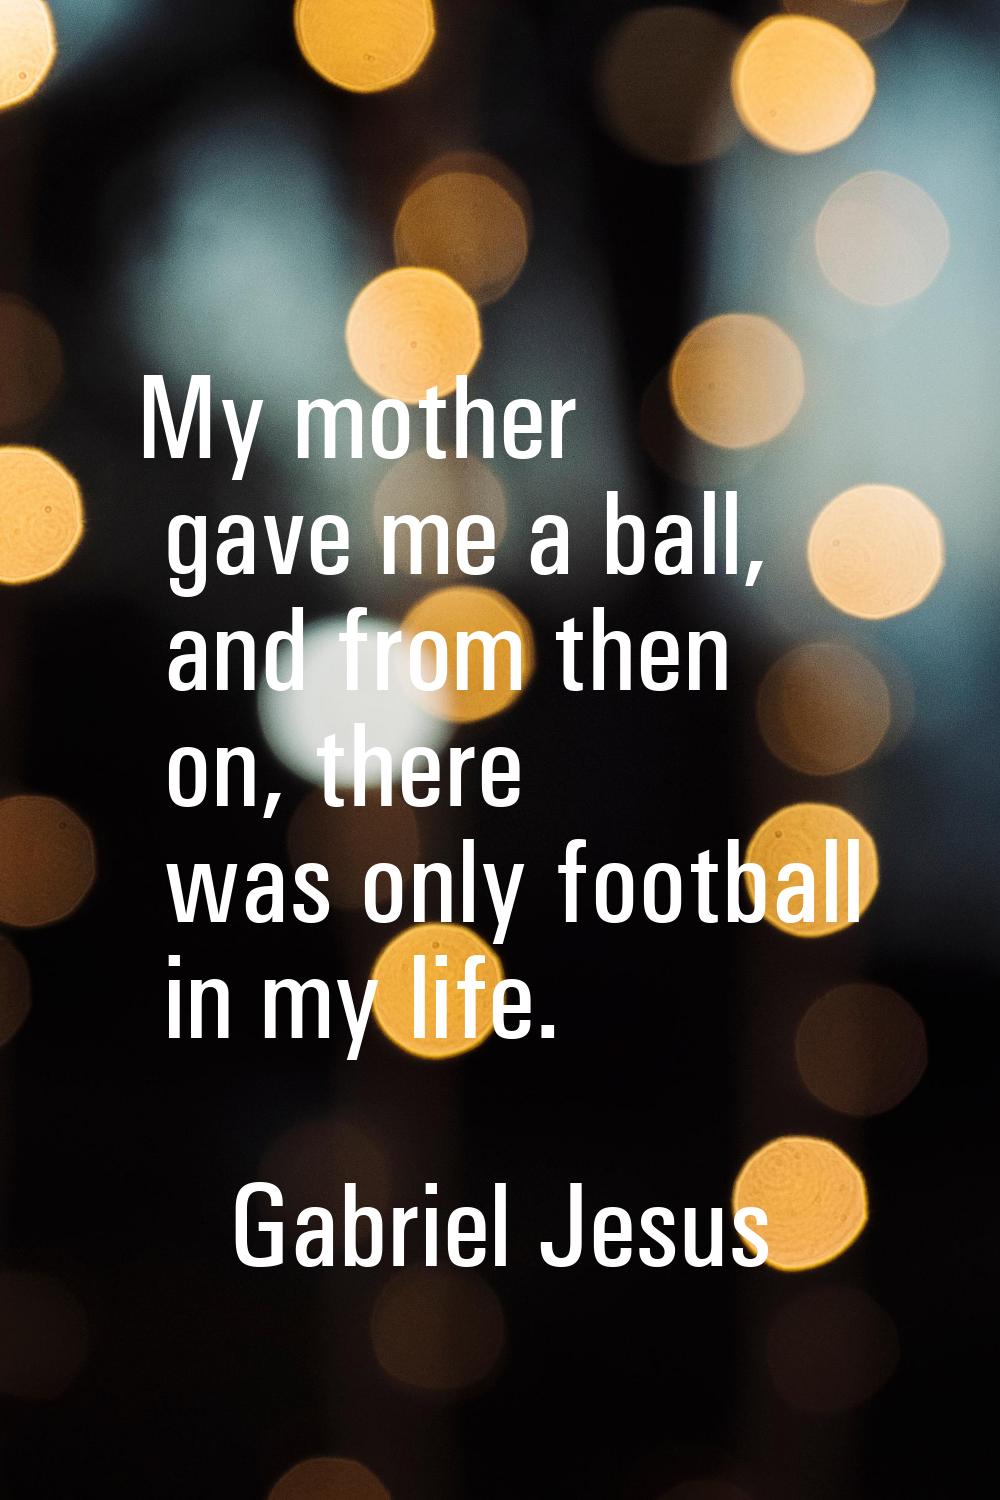 My mother gave me a ball, and from then on, there was only football in my life.